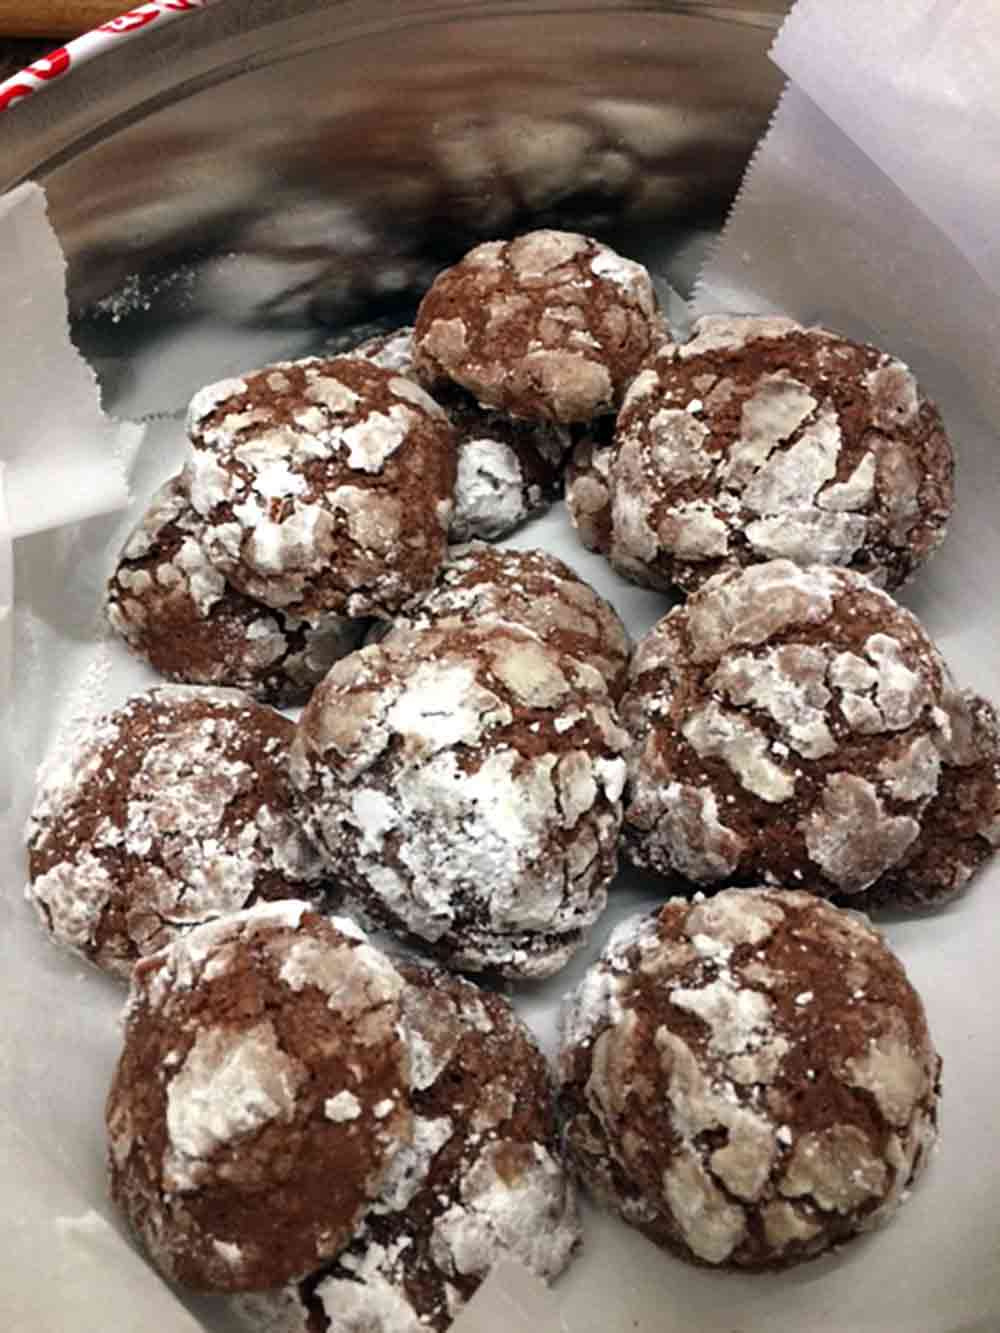 A tin of chocolate-ginger crinkle cookies that are dusted with powdered sugar an covered in cracks